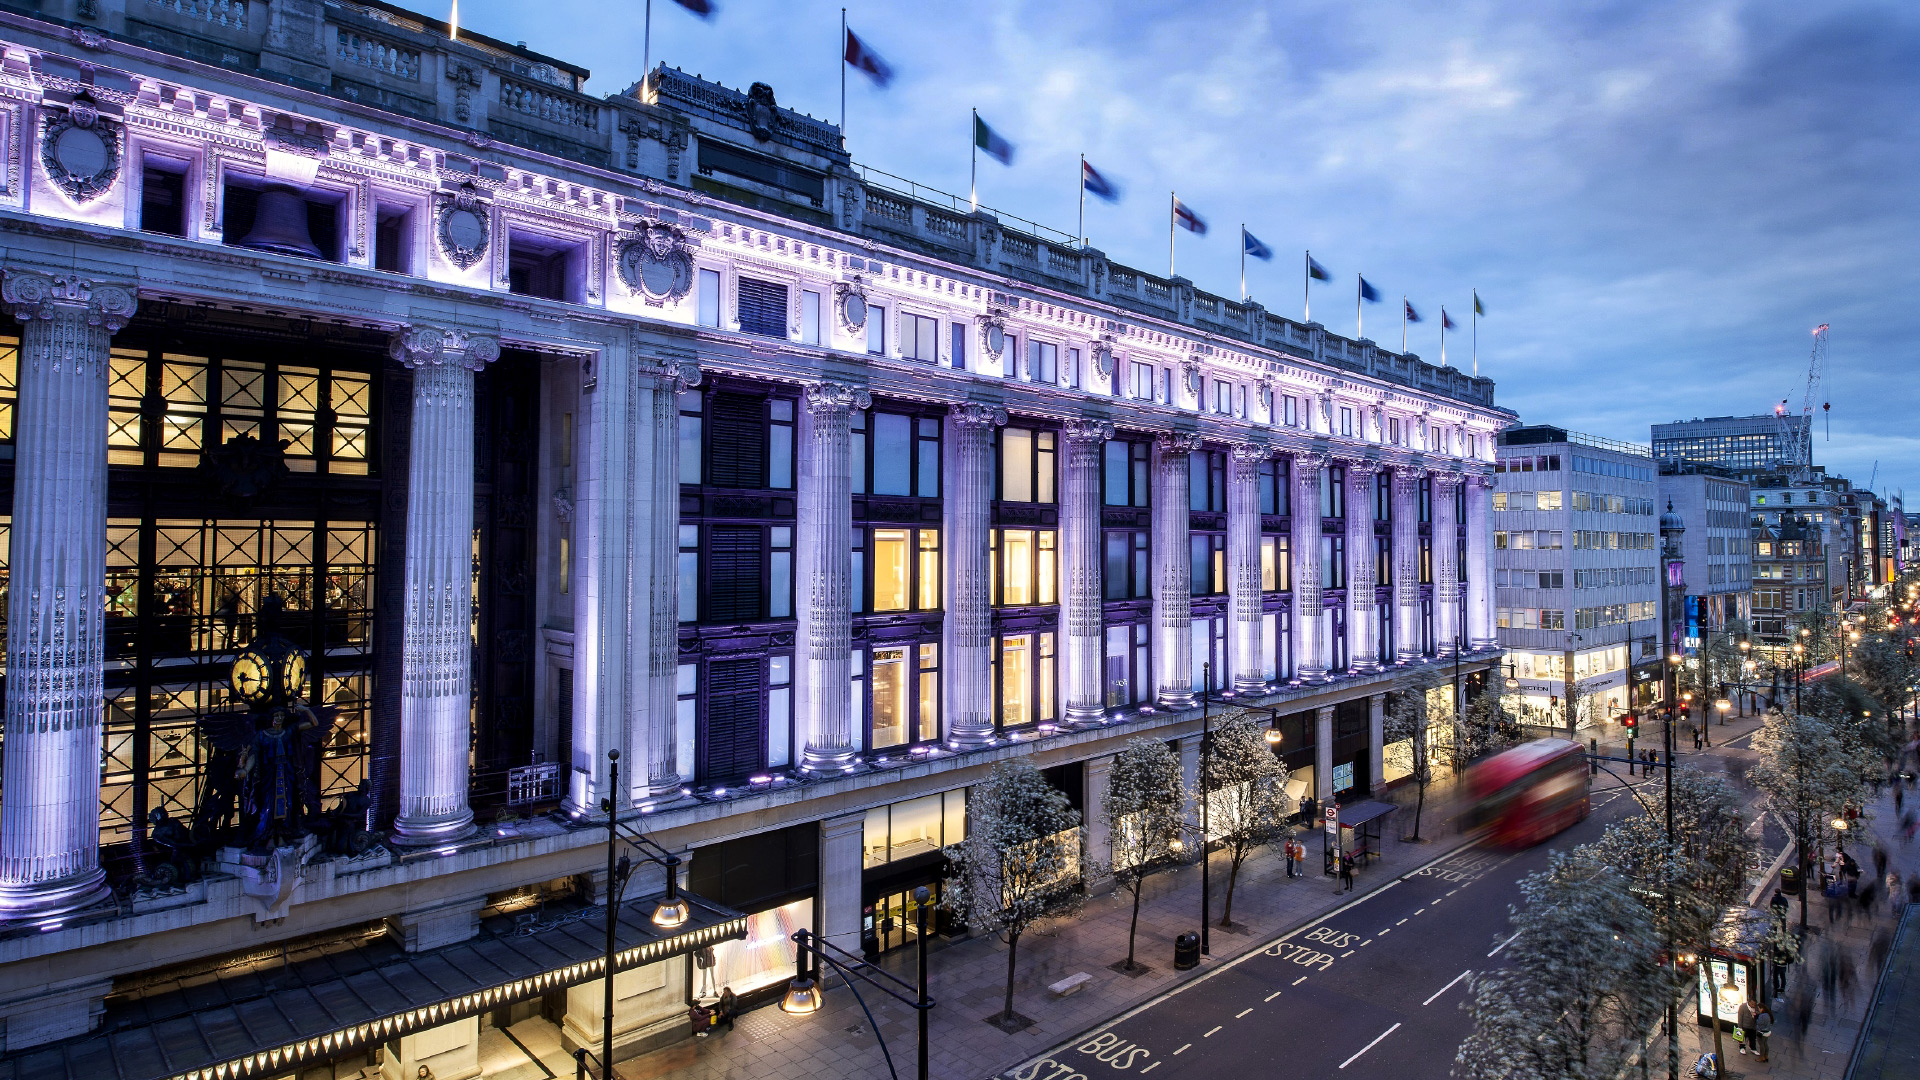 A panoramic view from high of the facade of Selfridges, lit up in purpley-white lights, with Oxford Street below.